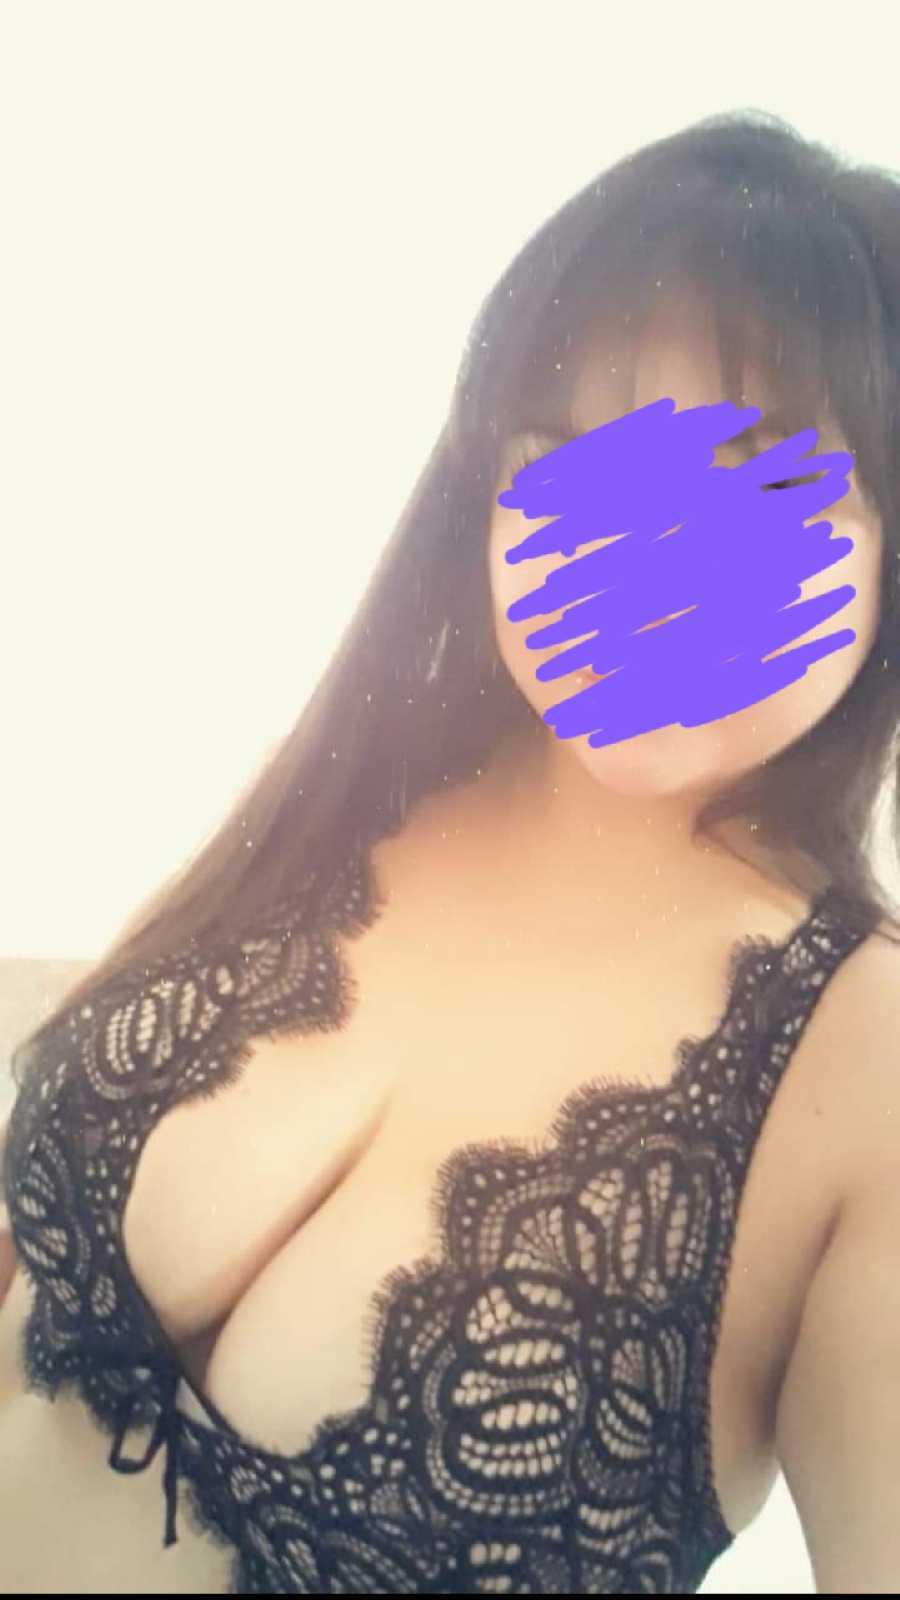 Pics she sent to me at Work